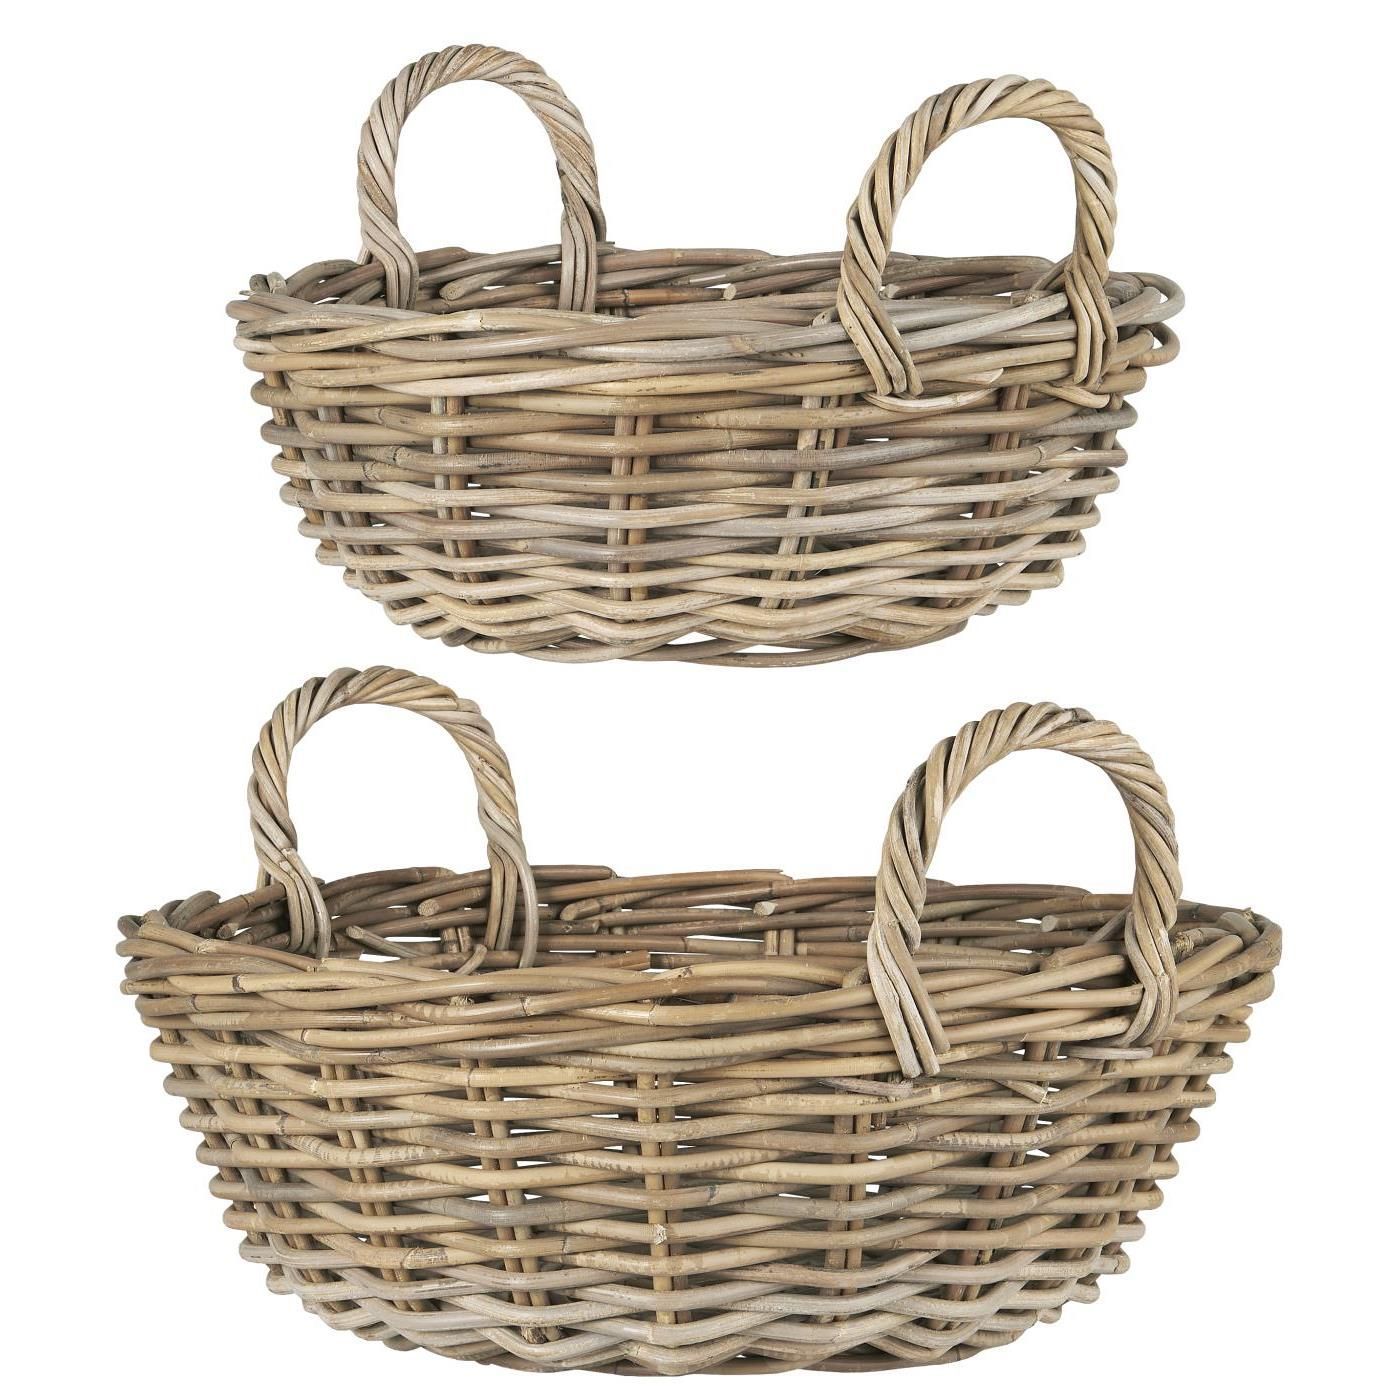 BEATY LOW RATTAN BASKET WITH HANDLES IN LARGE